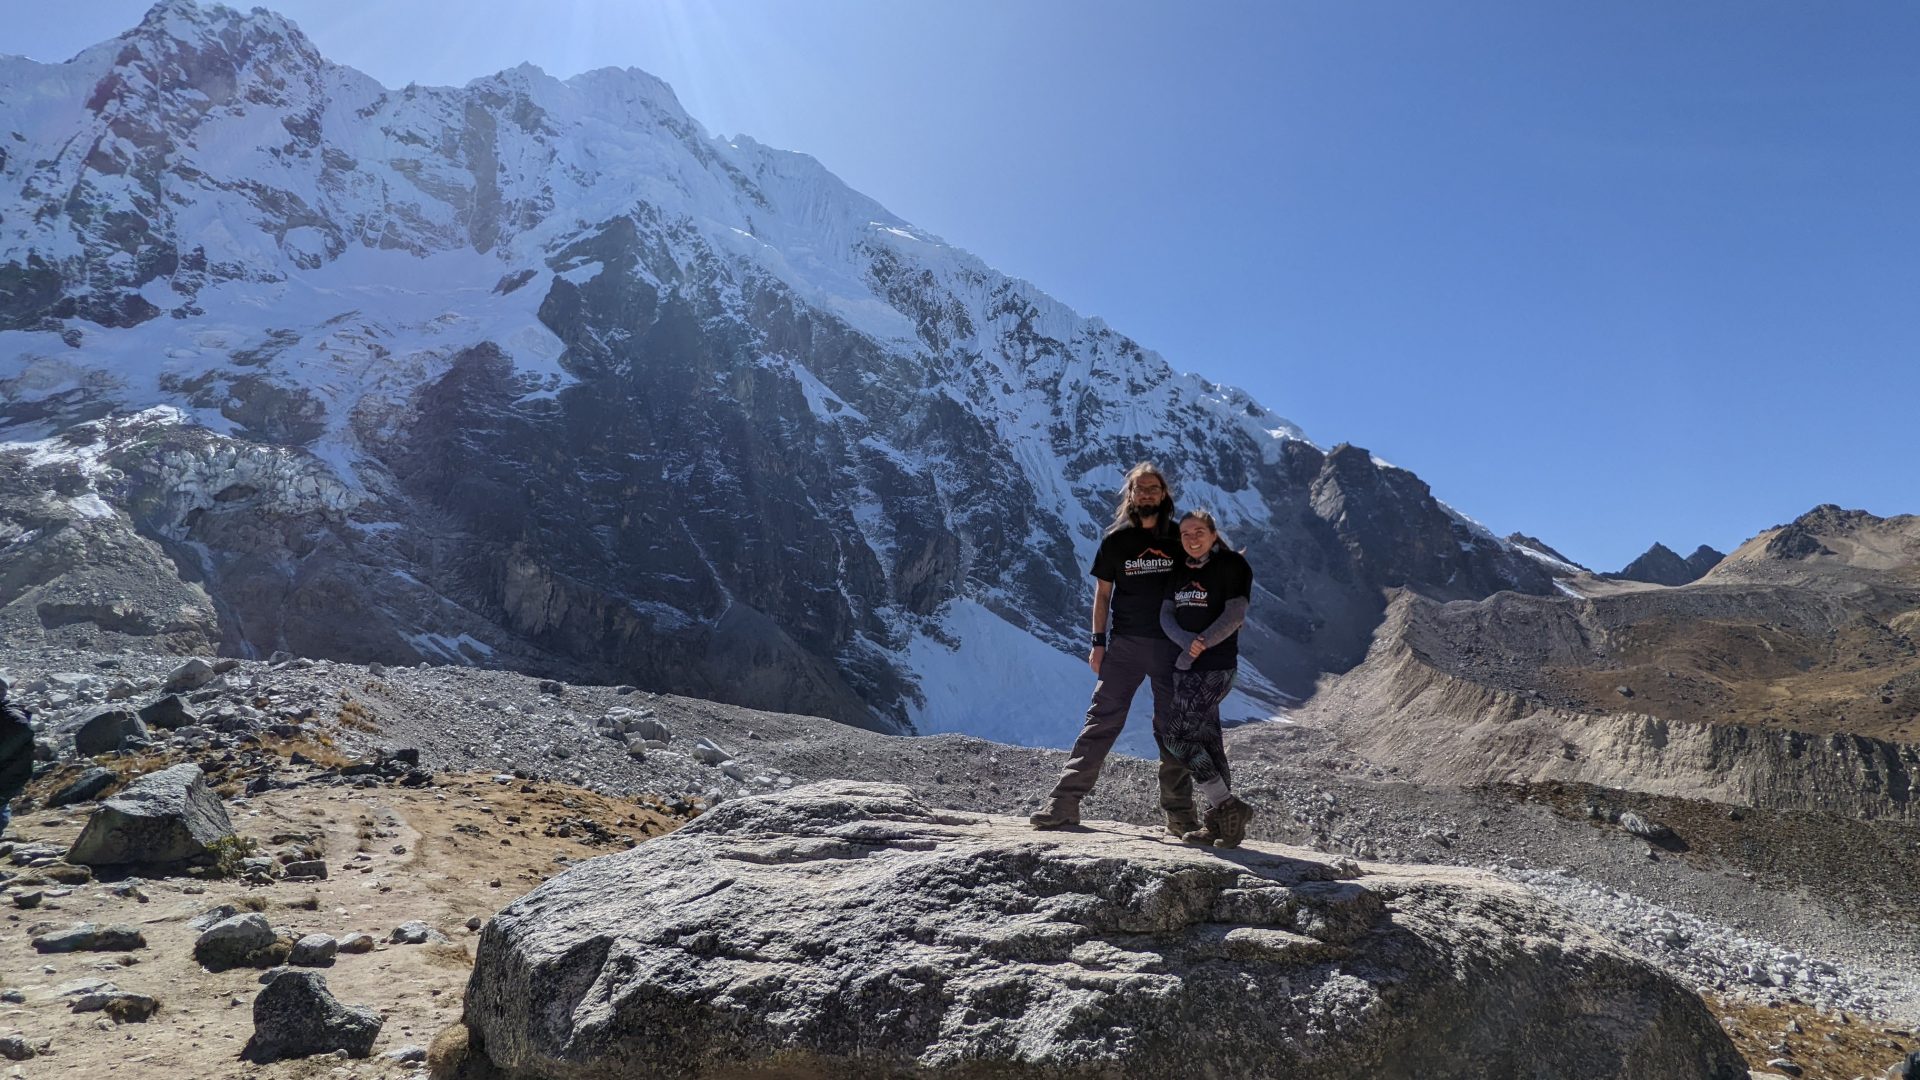 Luke Howkins and his wife smile at the camera and stand together on top of a large boulder in front of a mountain capped in snow. The sun shines above in the cloudless blue sky.